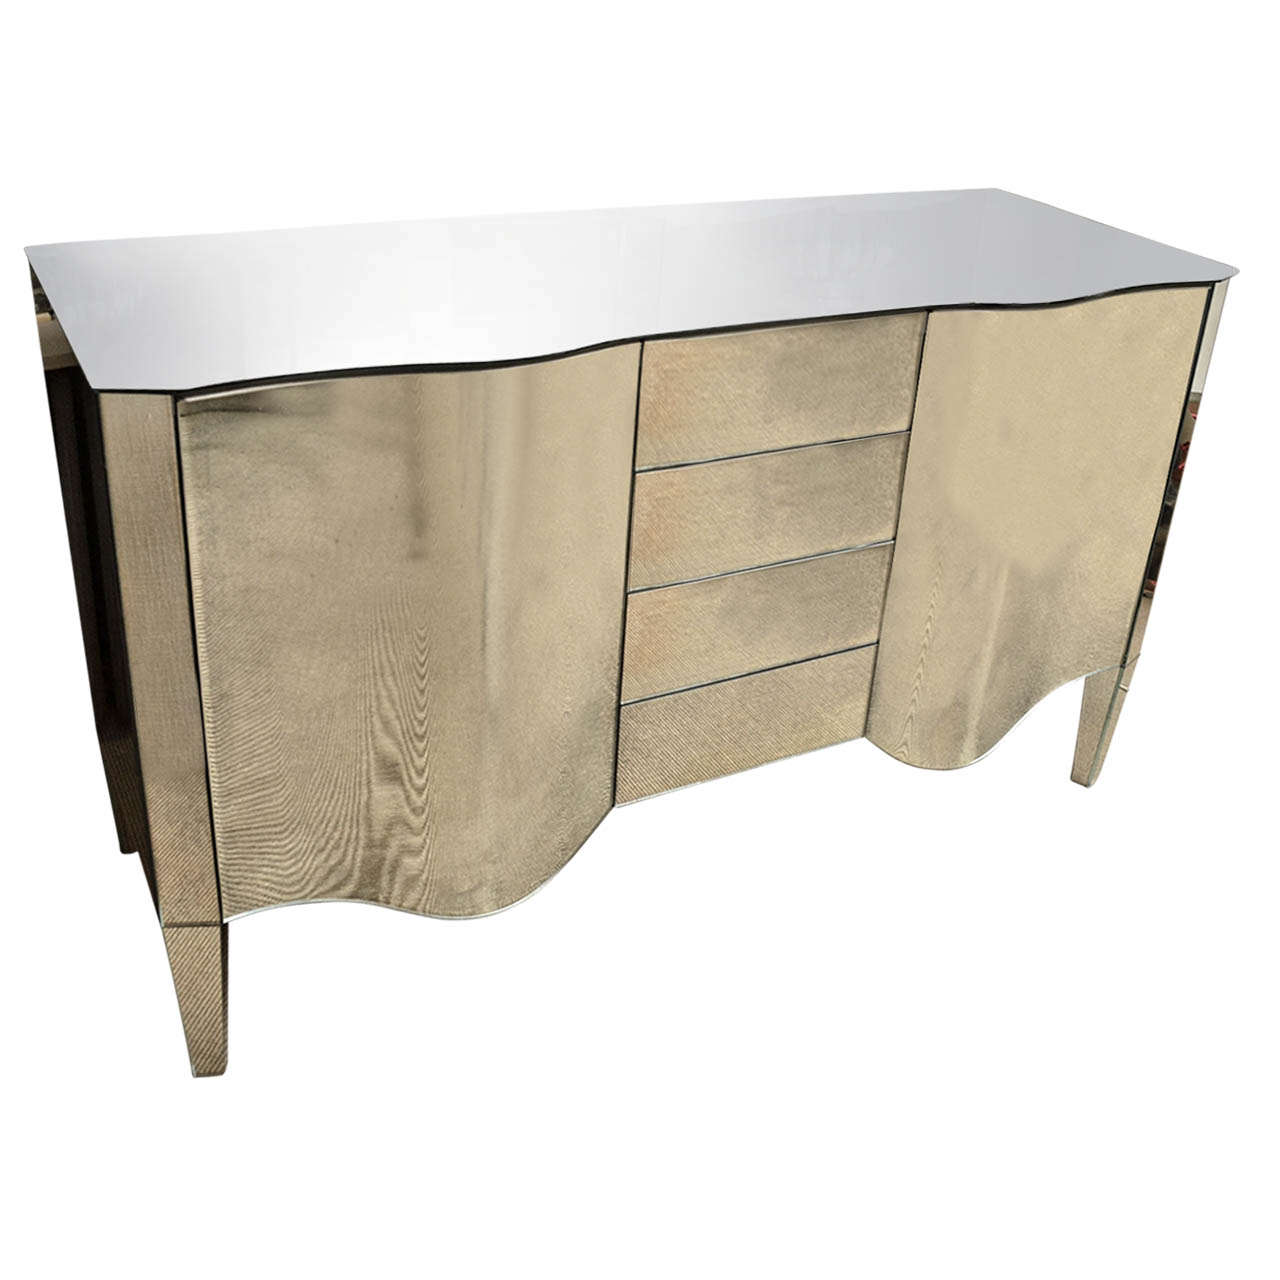 Magnificent Mirrored Sideboard/Dry Bar For Sale